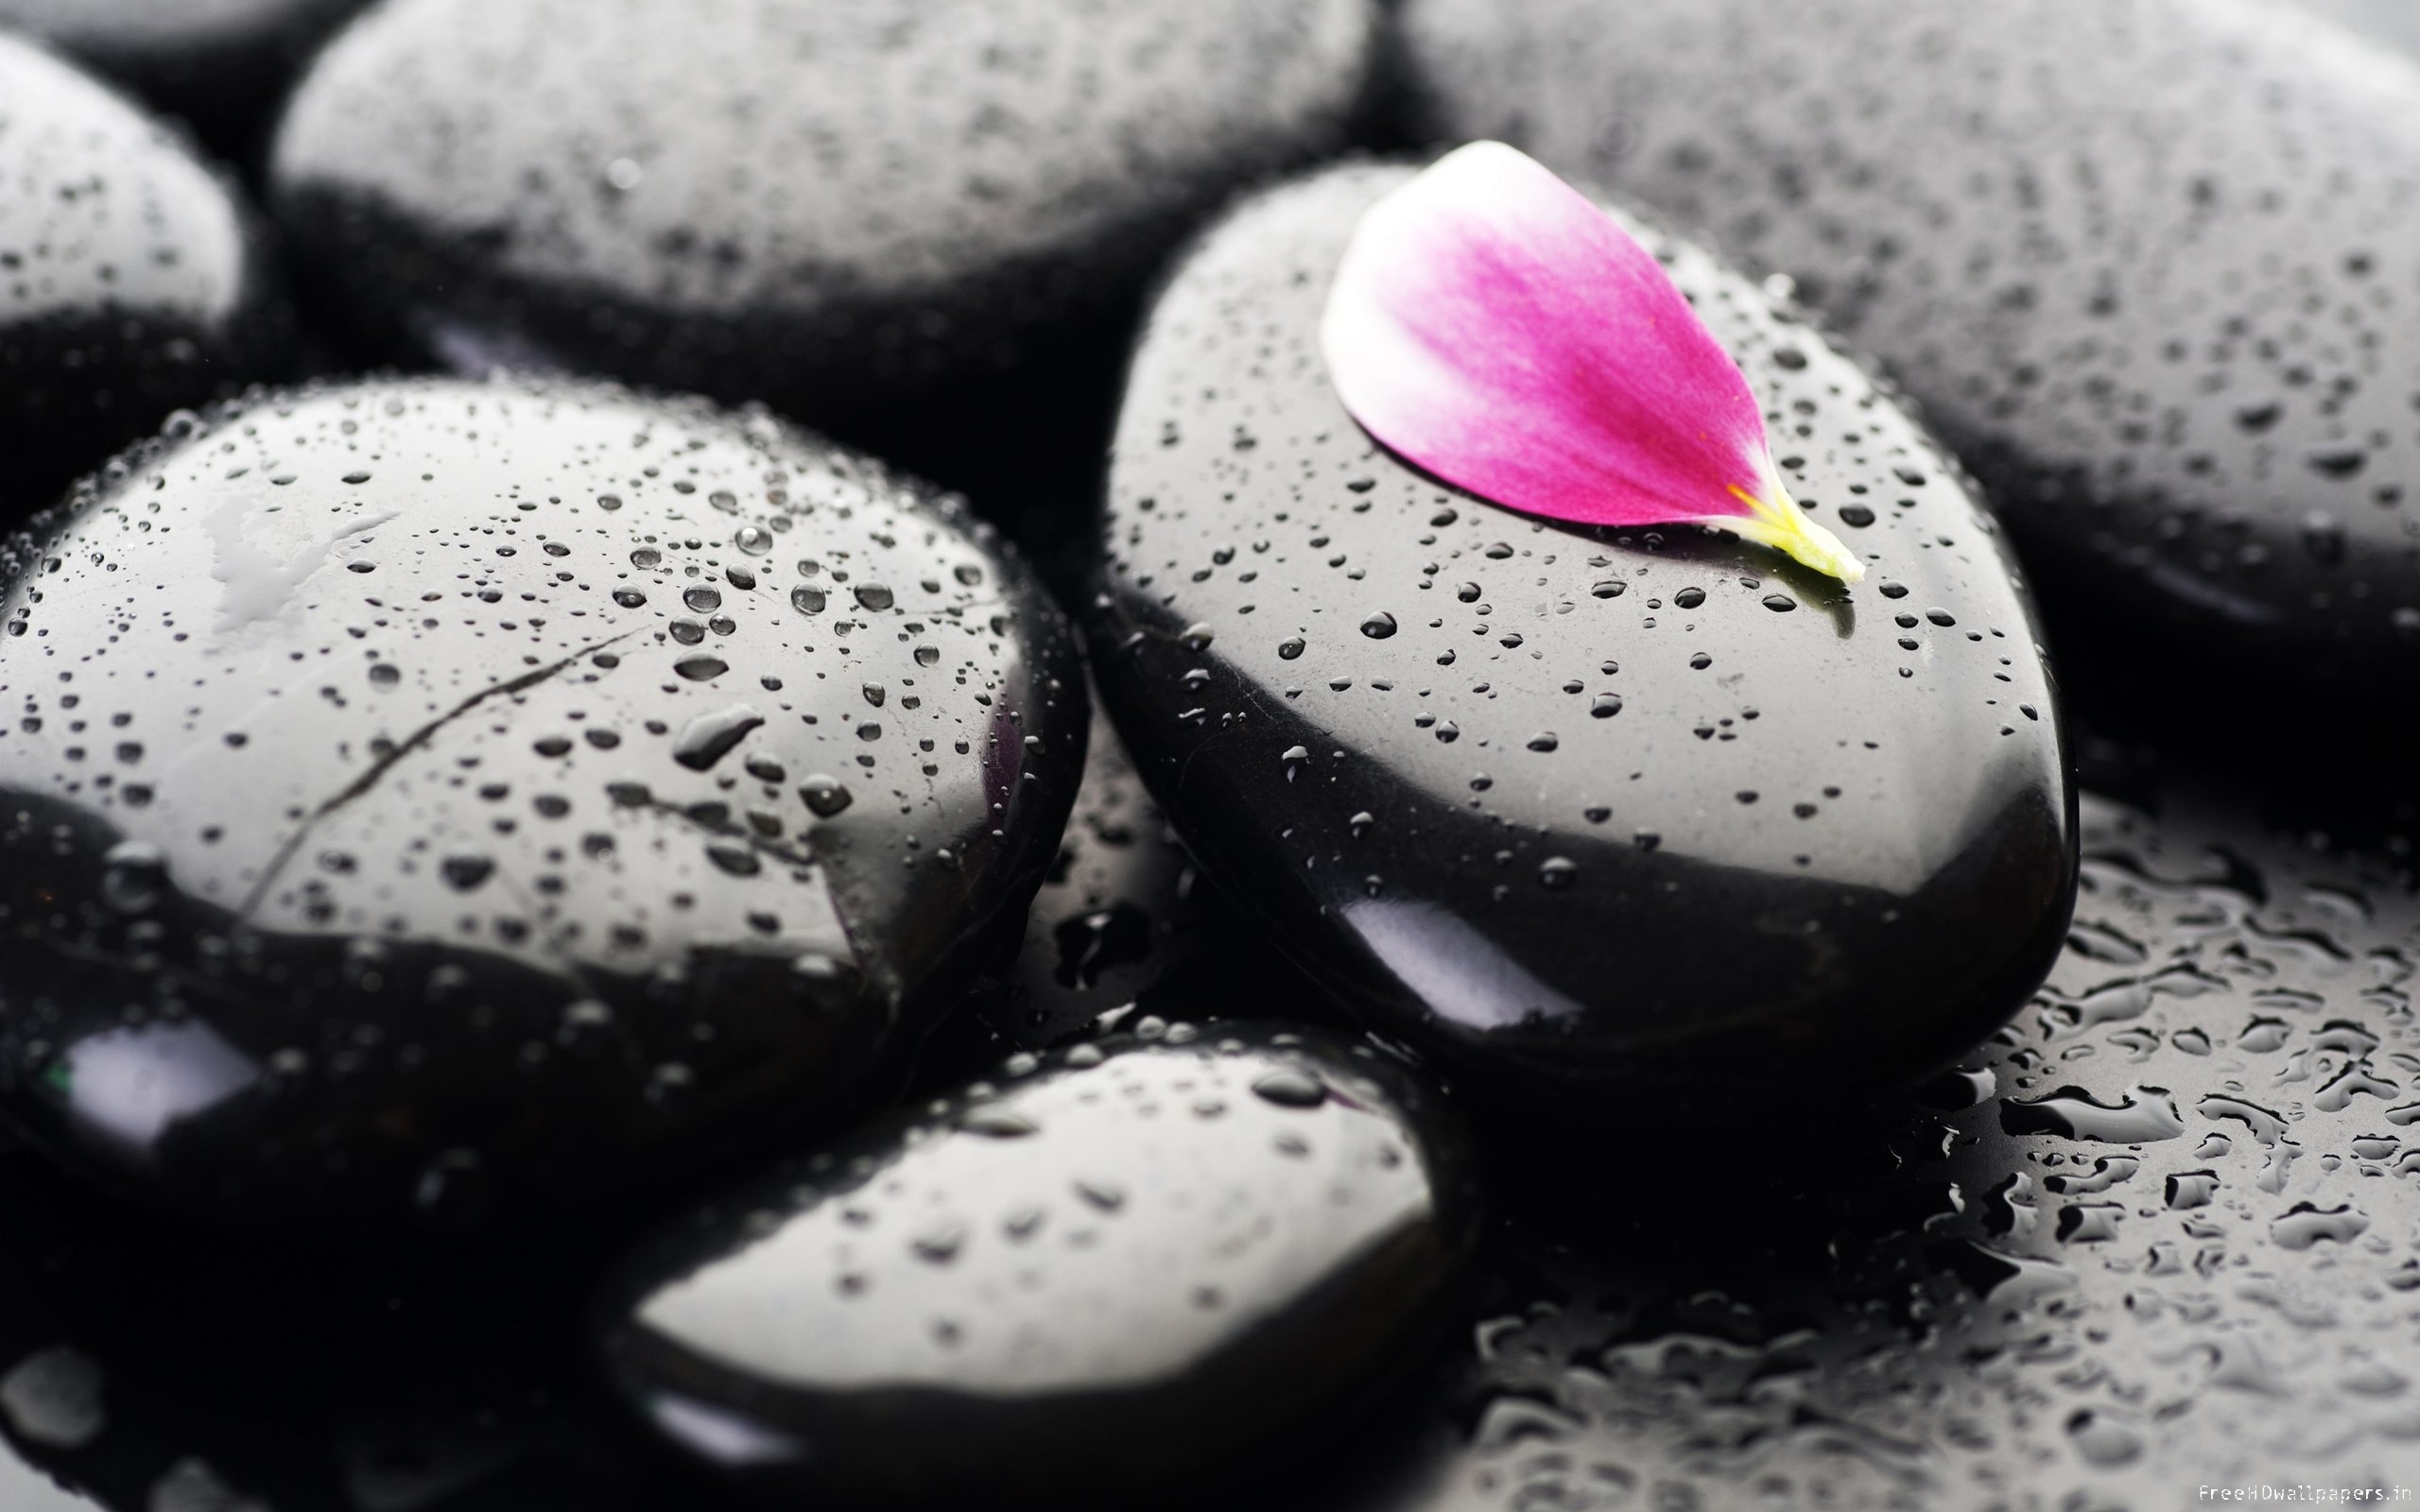 Religious Zen with petal and pebble elements.